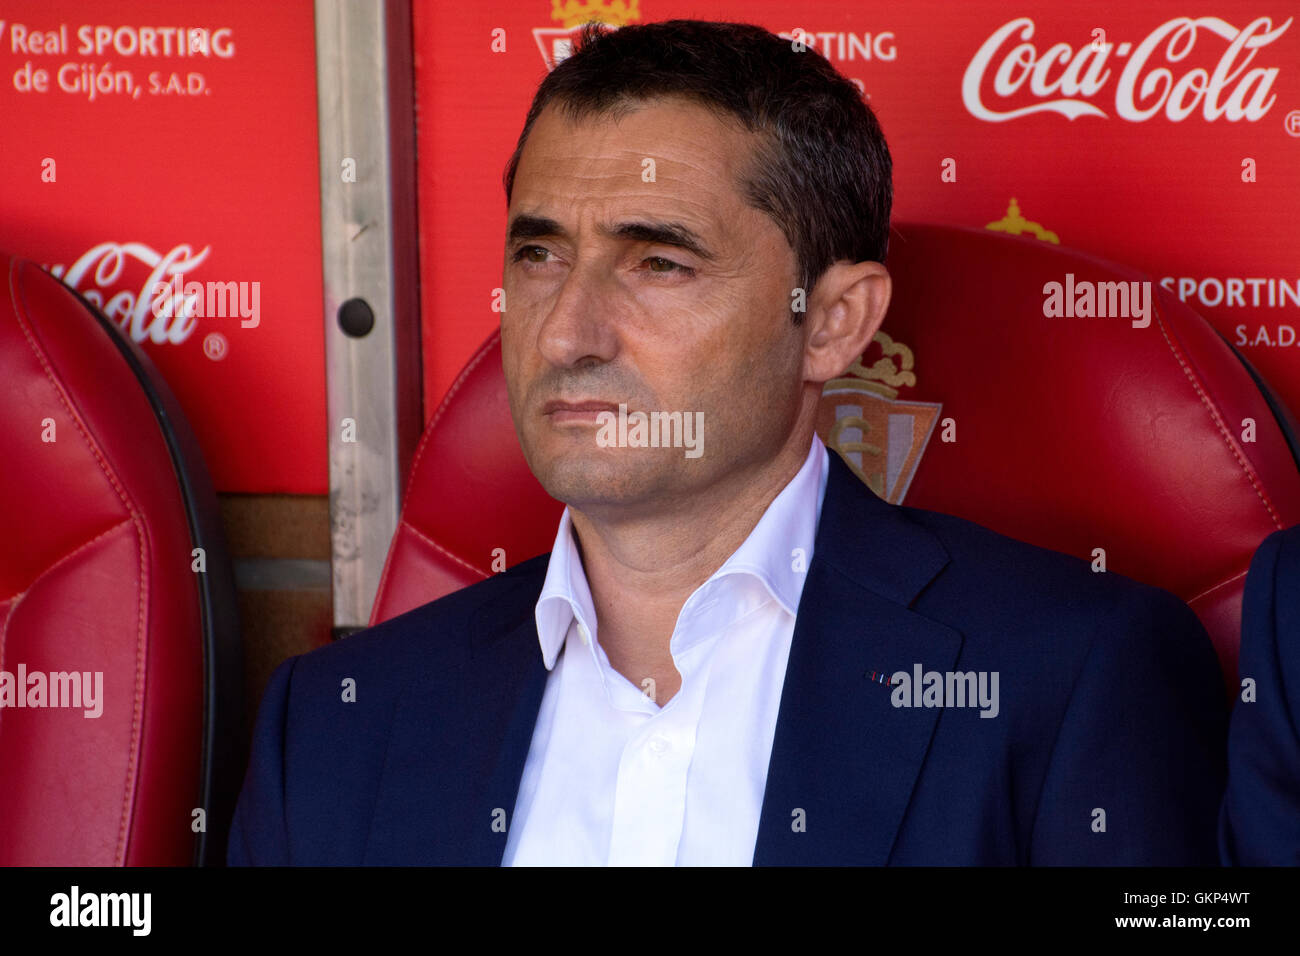 Gijon, Spain. 21st August, 2016. Ernesto Valverde (Coach, Athletic Club) during the football match of first round of Season 2016/2017 of Spanish league ‘La Liga’ between Real Sporting de Gijon and Athletic Club Bilbao at Molinon Stadium on August 21, 2016 in Gijon, Spain. Credit: David Gato/Alamy Live News Stock Photo